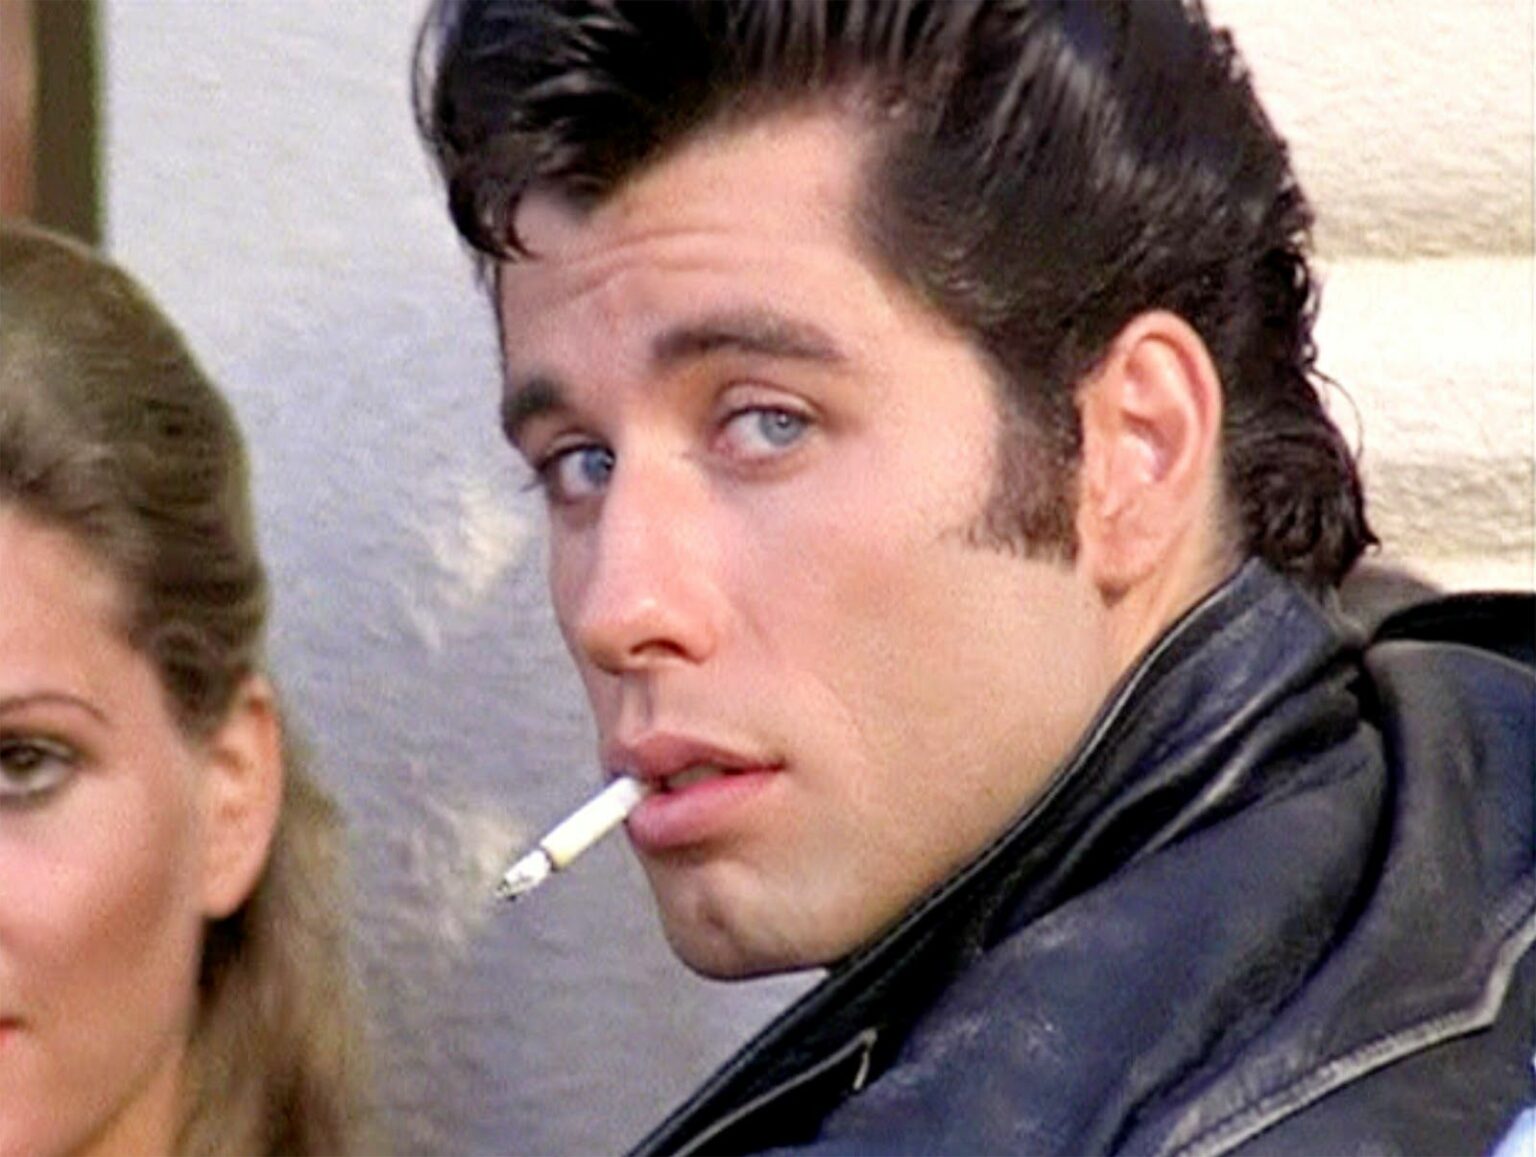 John Travolta's Singing Voice in Grease: Fact or Fiction?